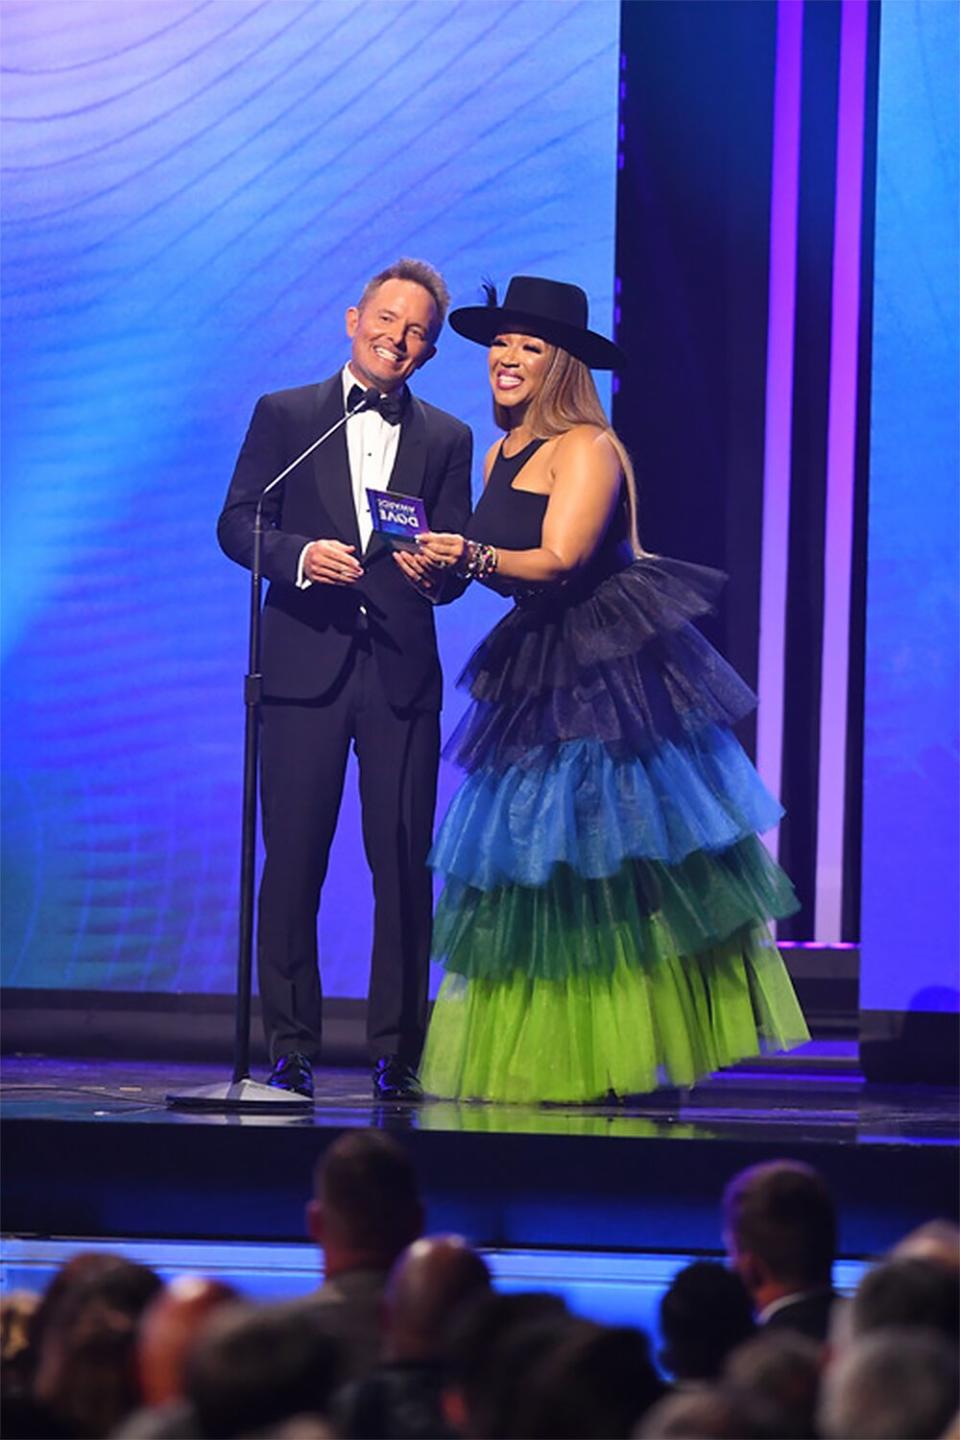  Erica Campbell and Chris Tomlin Gear up to Host the Dove Awards